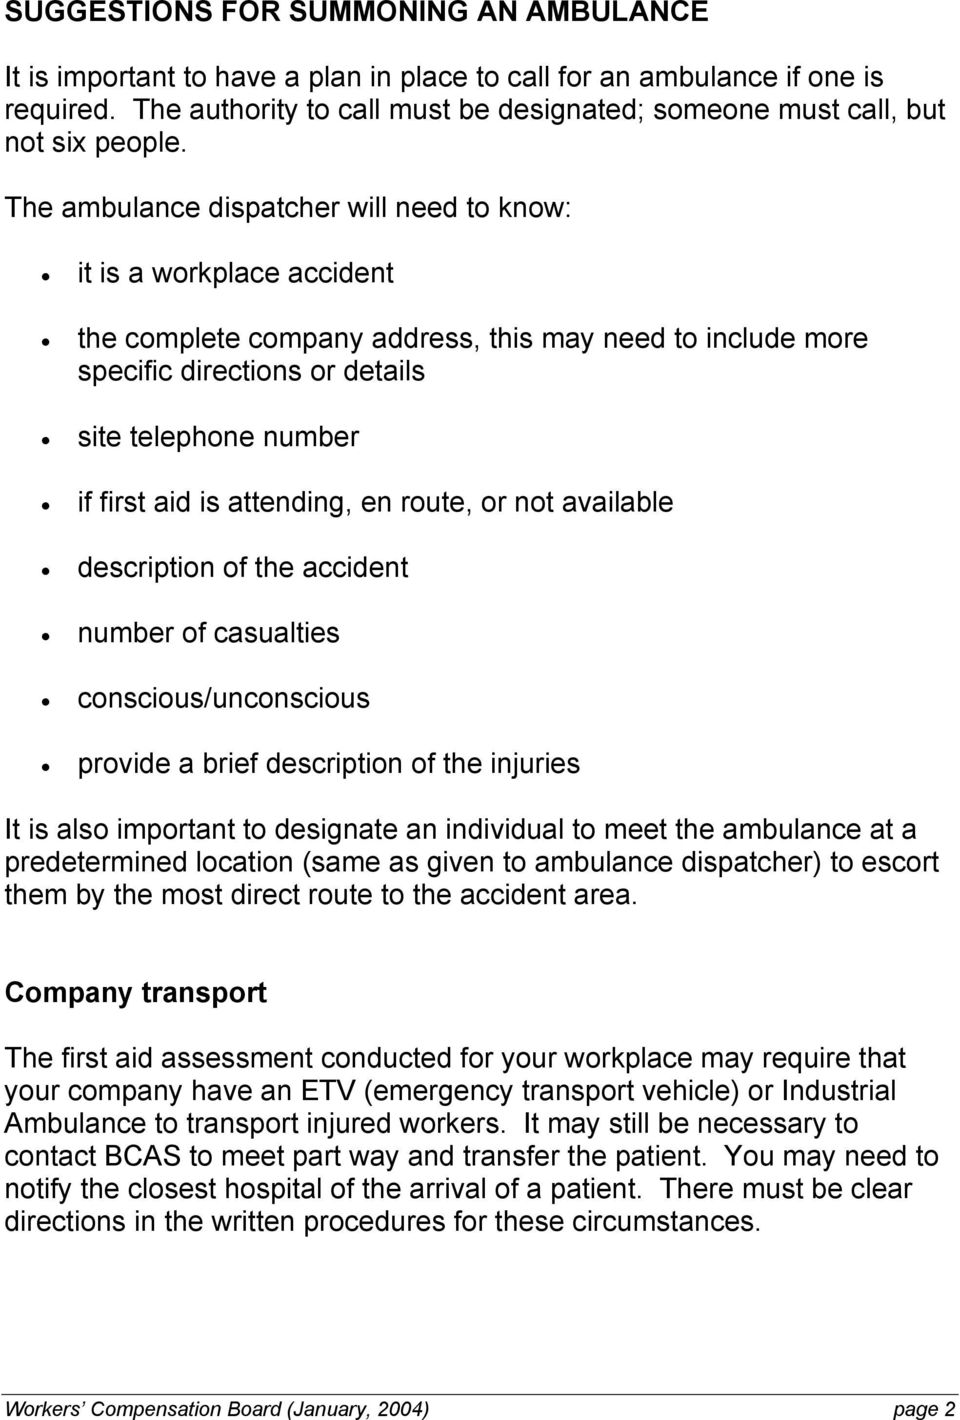 The ambulance dispatcher will need to know: it is a workplace accident the complete company address, this may need to include more specific directions or details site telephone number if first aid is